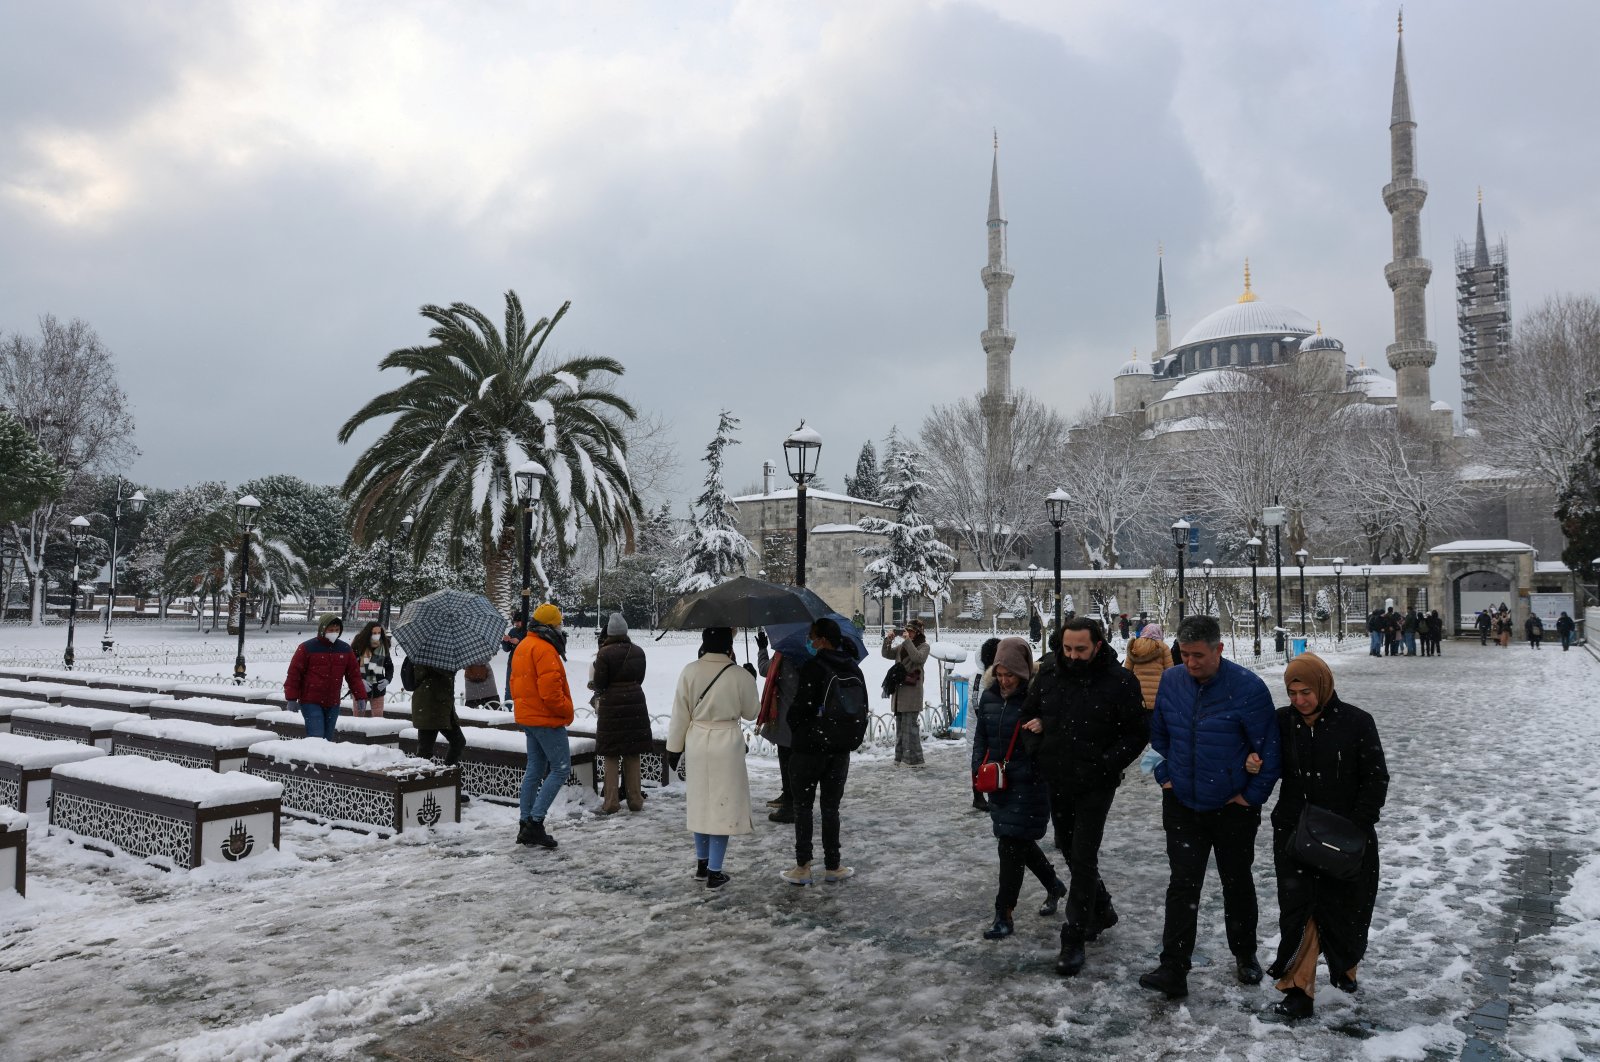 Tourists walk along Sultanahmet Square as the Sultan Ahmet Mosque, popularly known as the Blue Mosque, is seen in the background during a snowy day in Istanbul, Turkey, Jan. 24, 2022. (Reuters Photo)